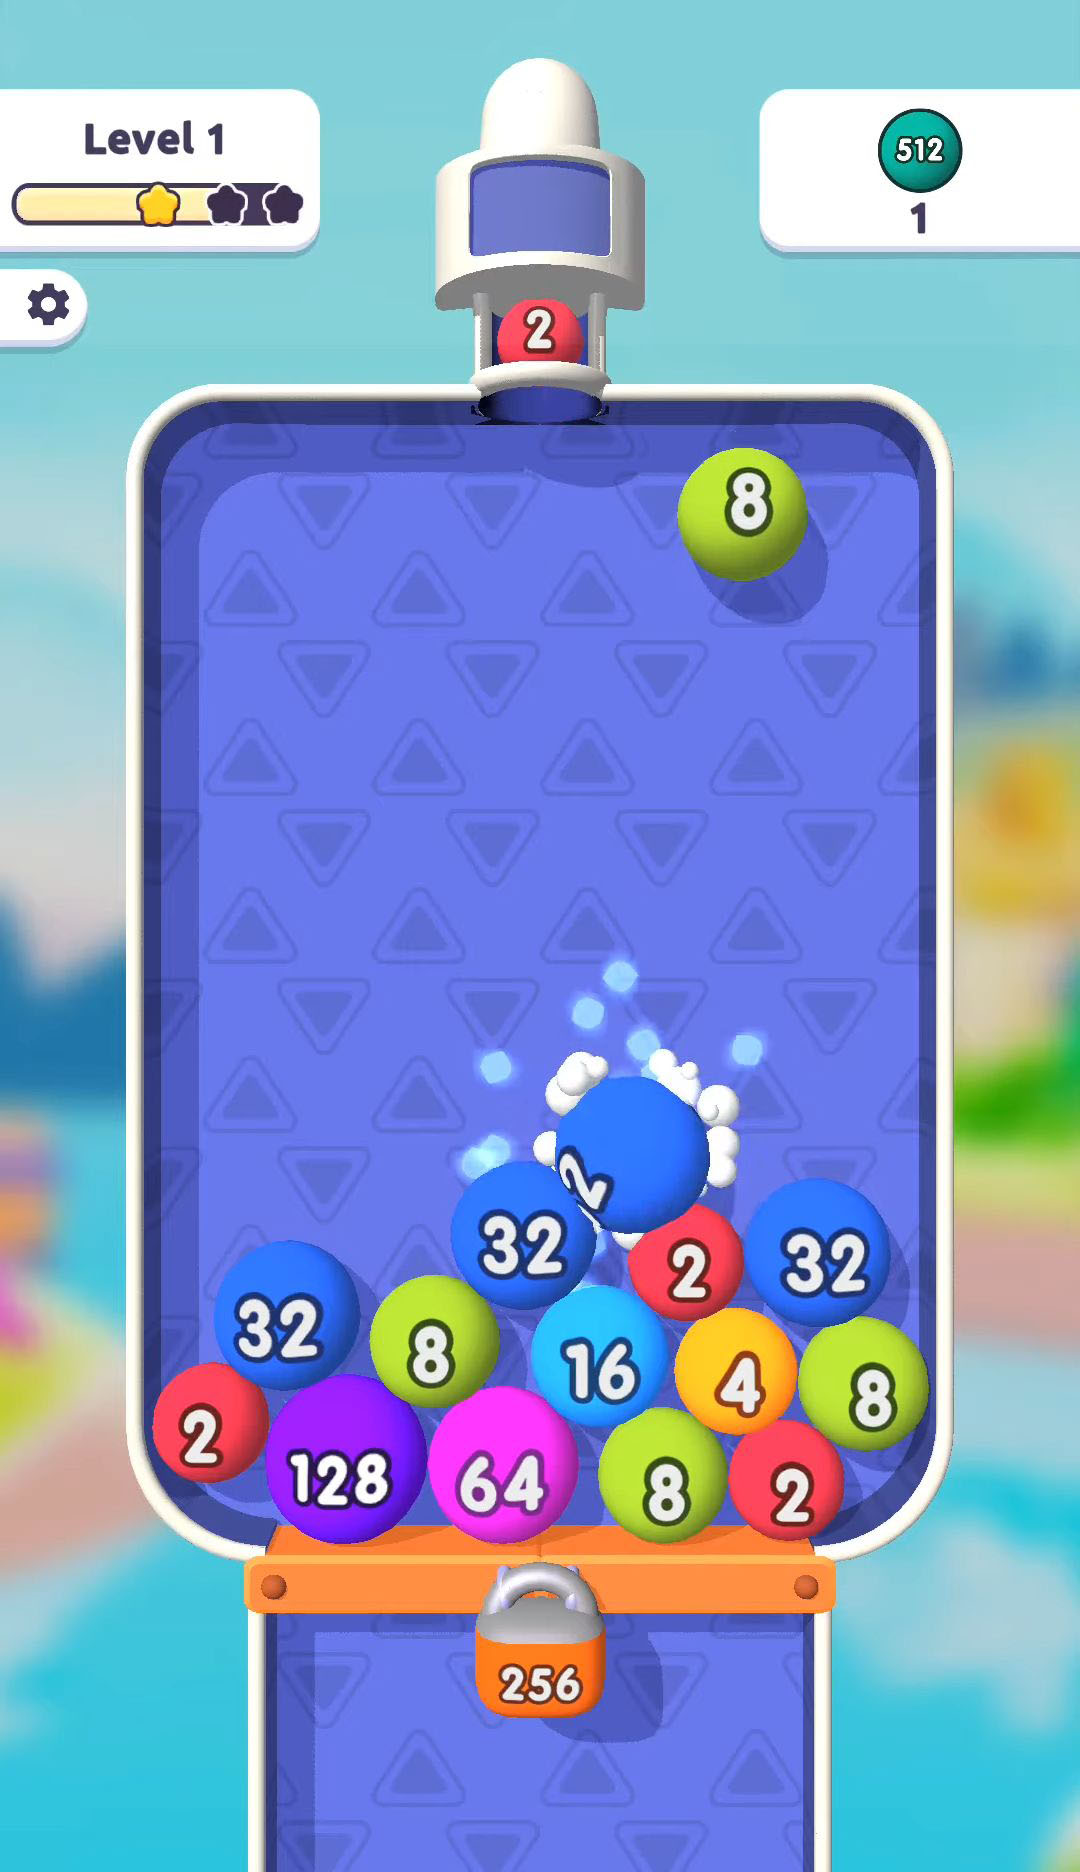 Gameplay of the Bubble Buster 2048 for Android phone or tablet.